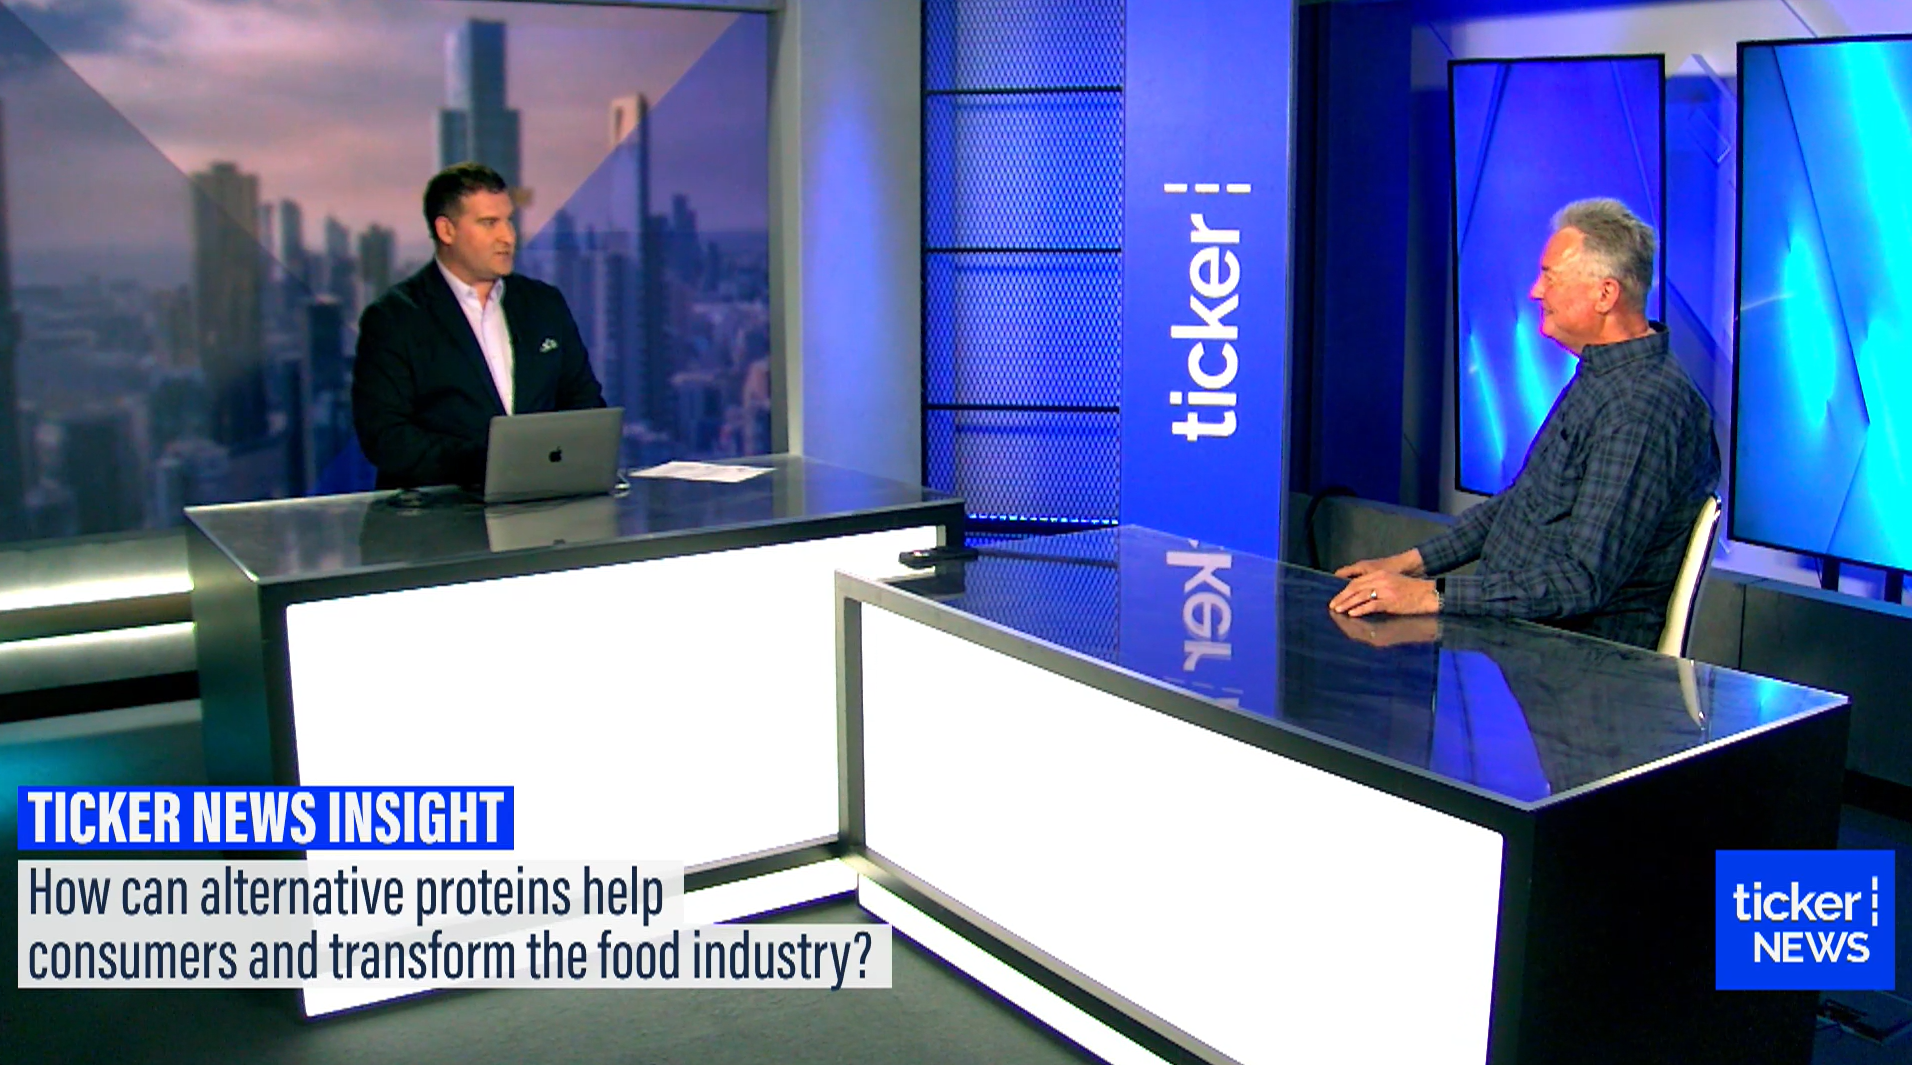 Food Frontier’s Dr Simon Eassom discusses protein alternatives and climate change on Ticker News Insight